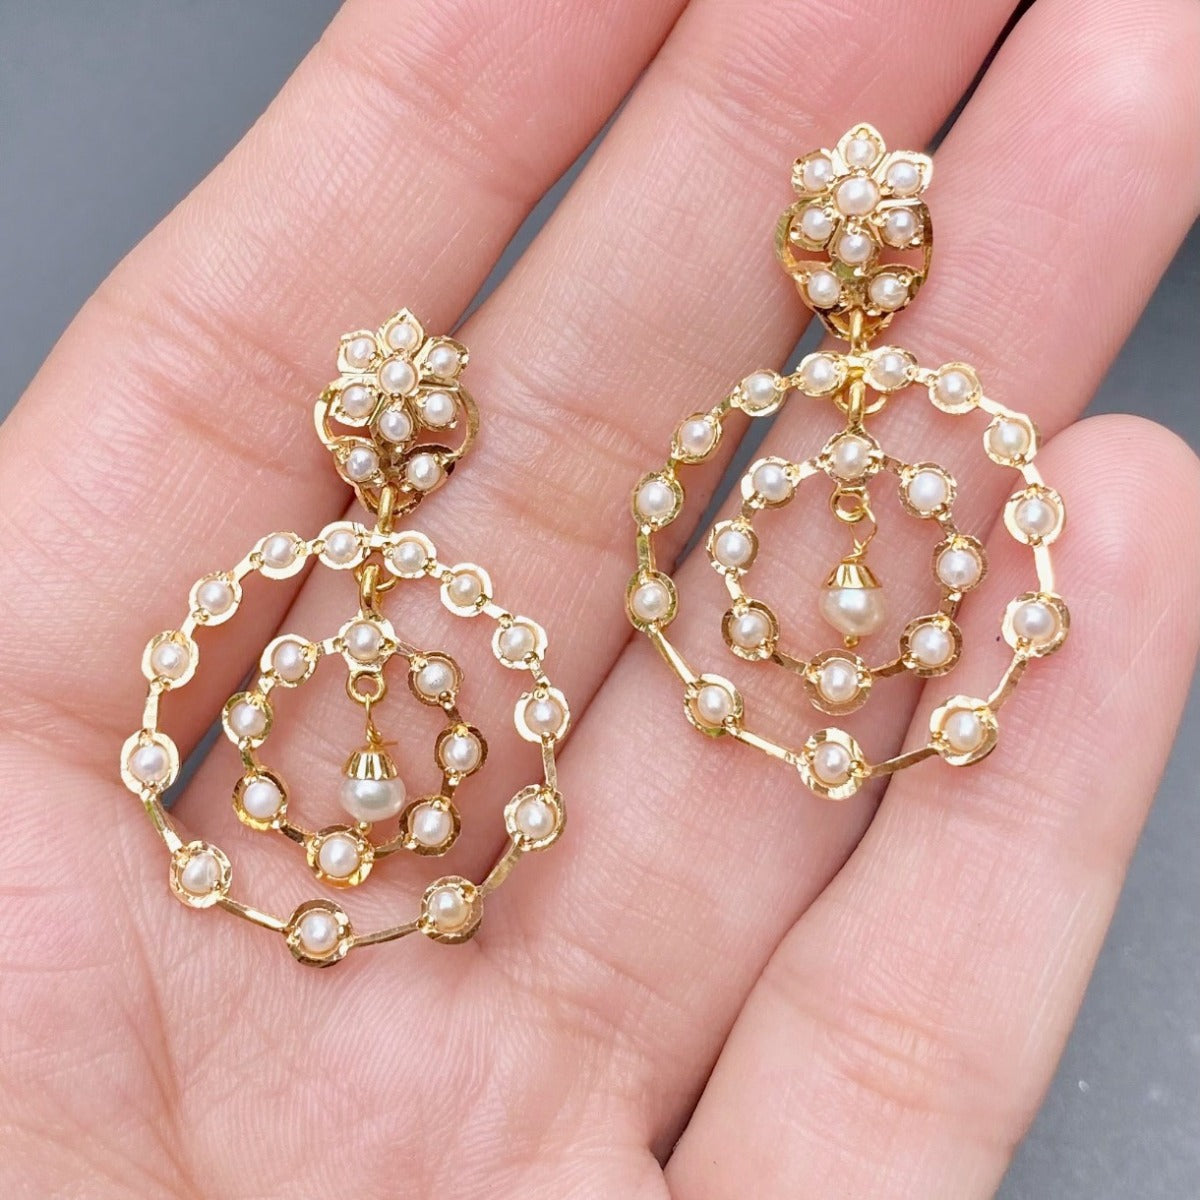 916 gold earrings set with seed pearls